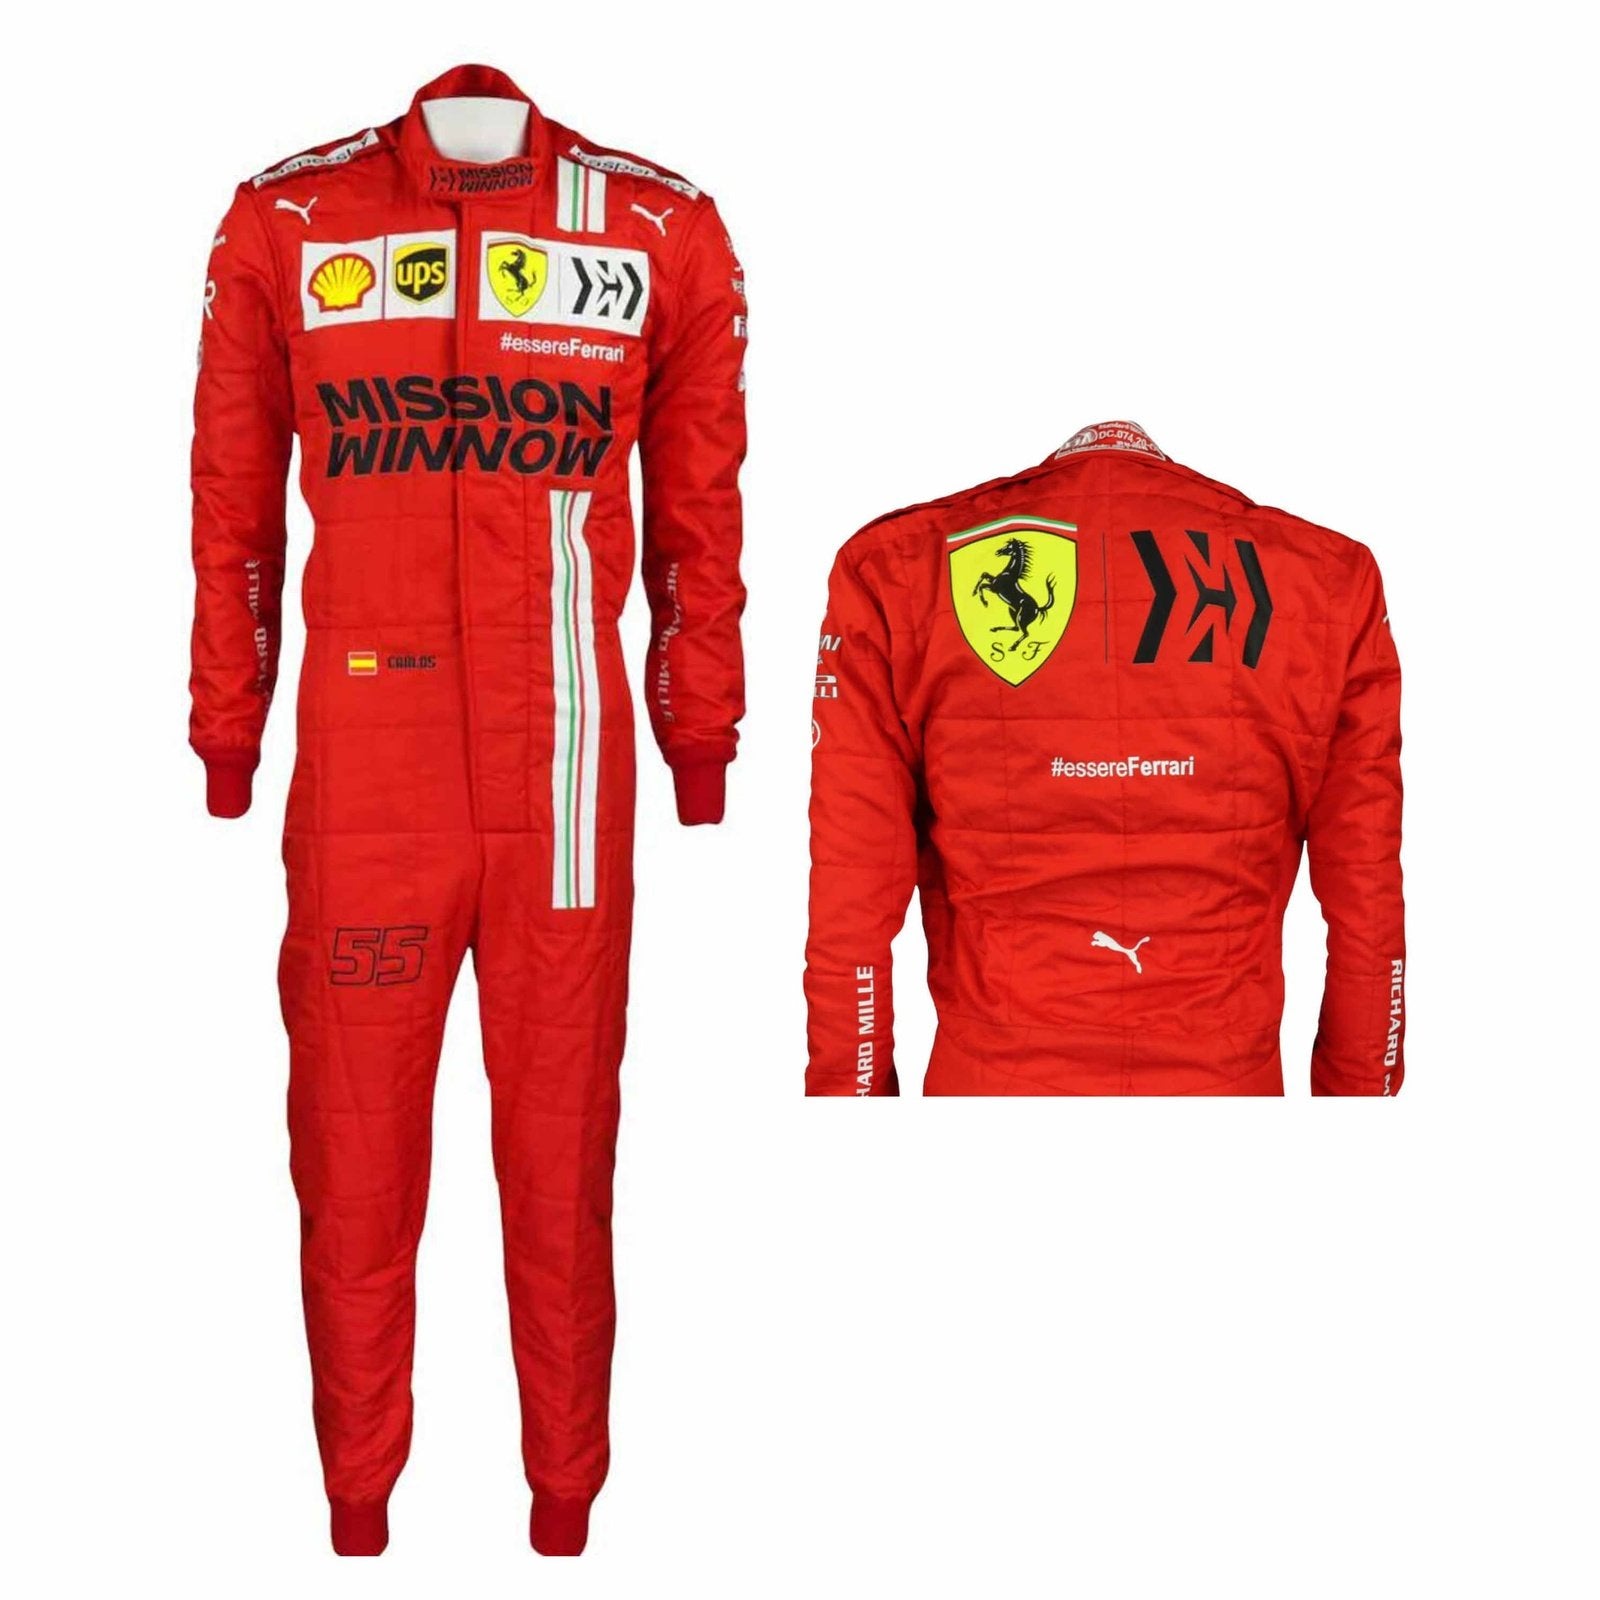 Go kart racing Sublimation Protective clothing Racing gear Suit NN-053